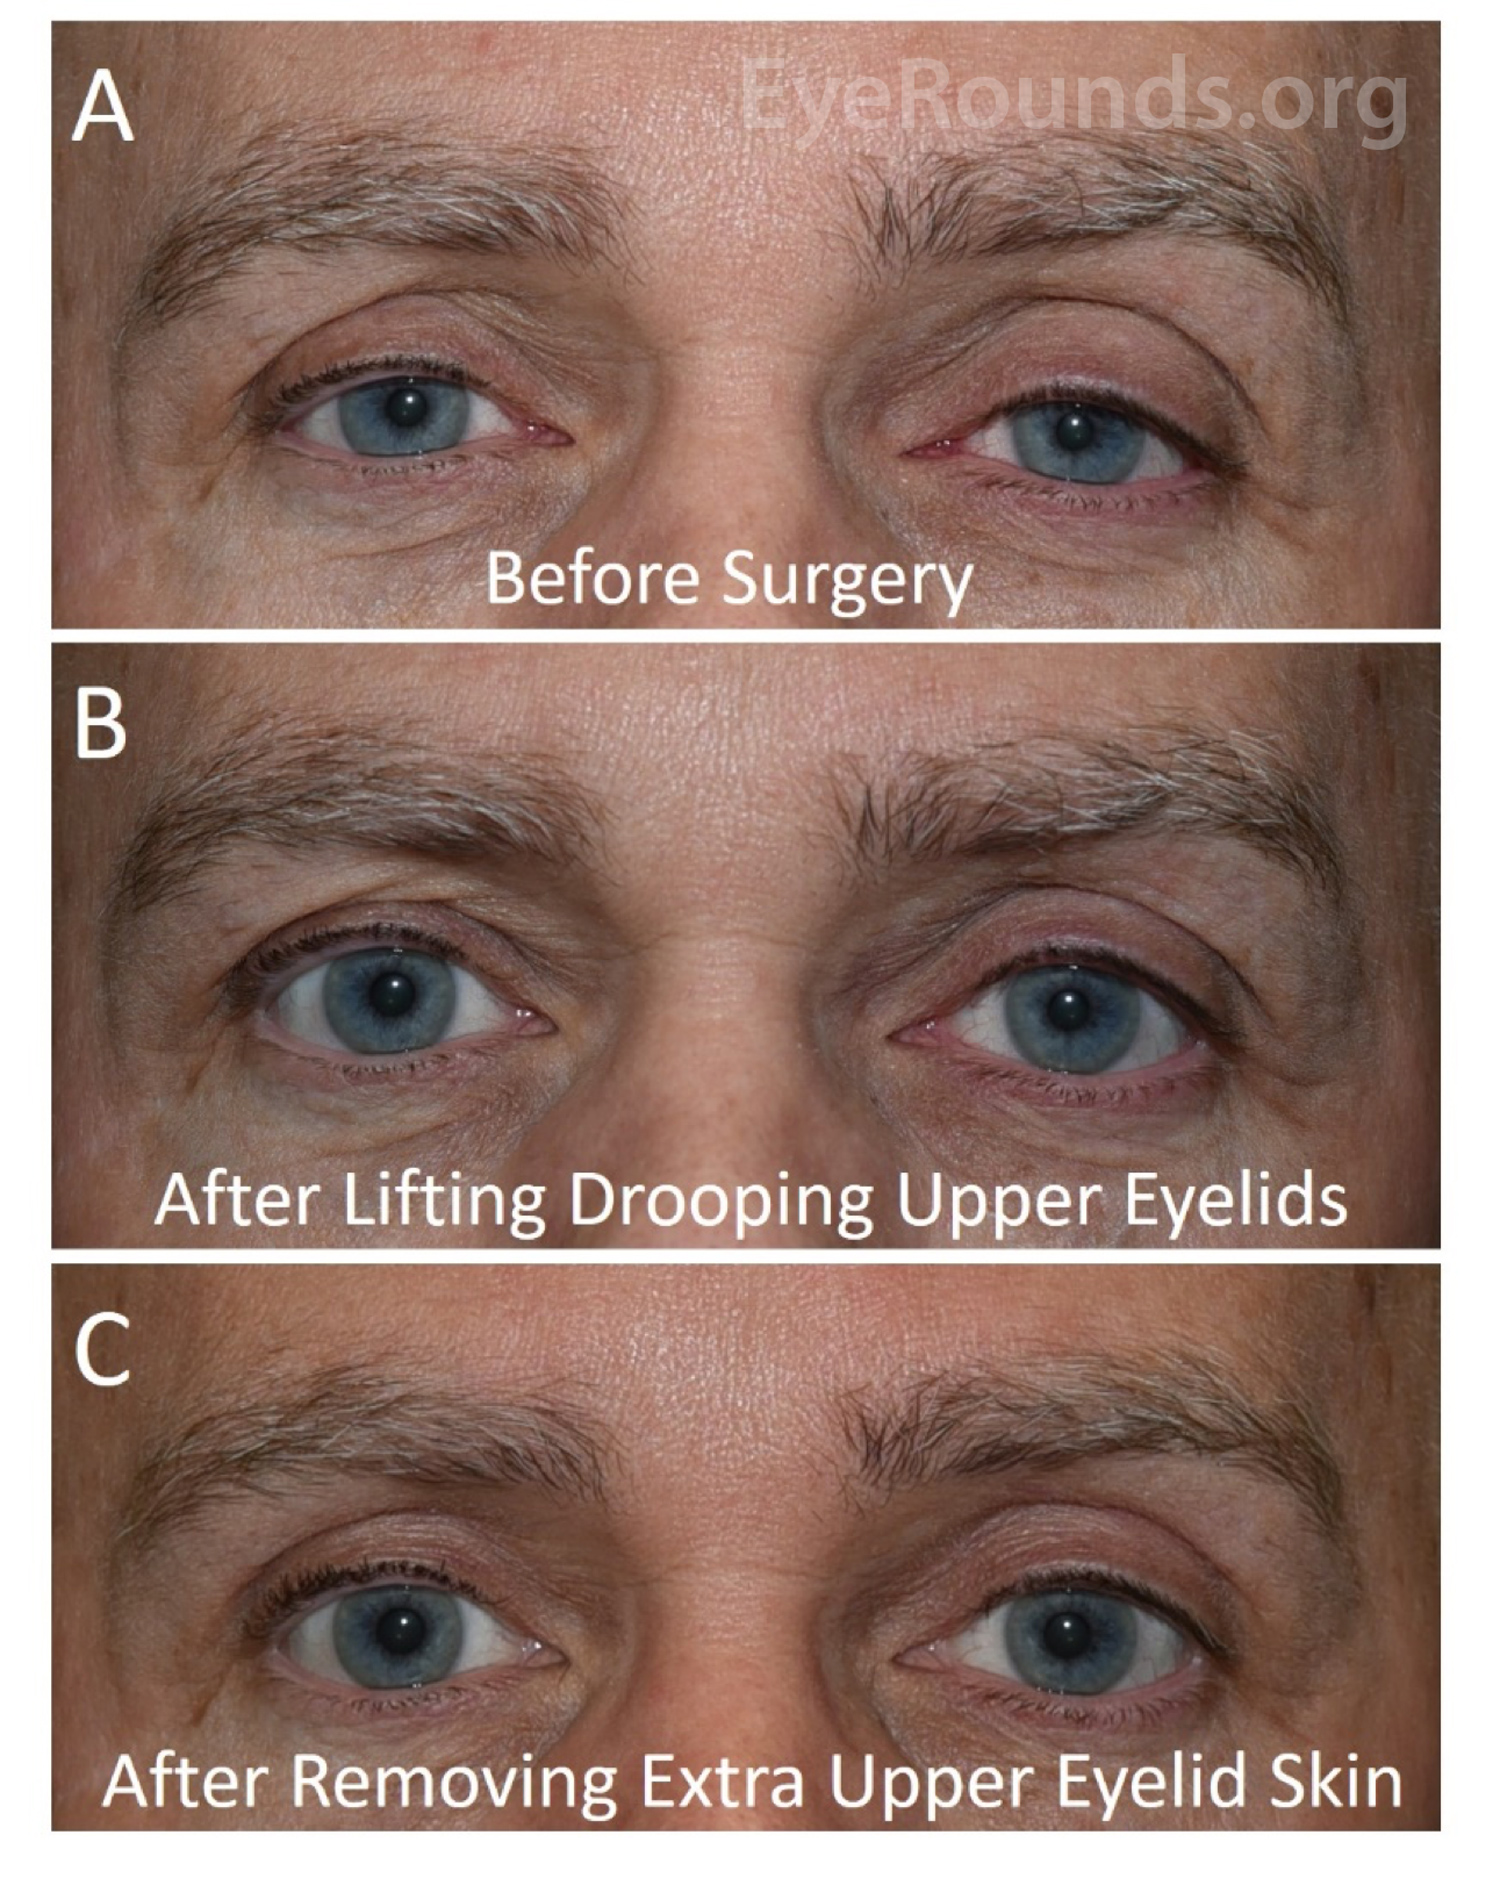 before surgery, after lift drooping upper eyelids, after removing extra upper eyelid skin